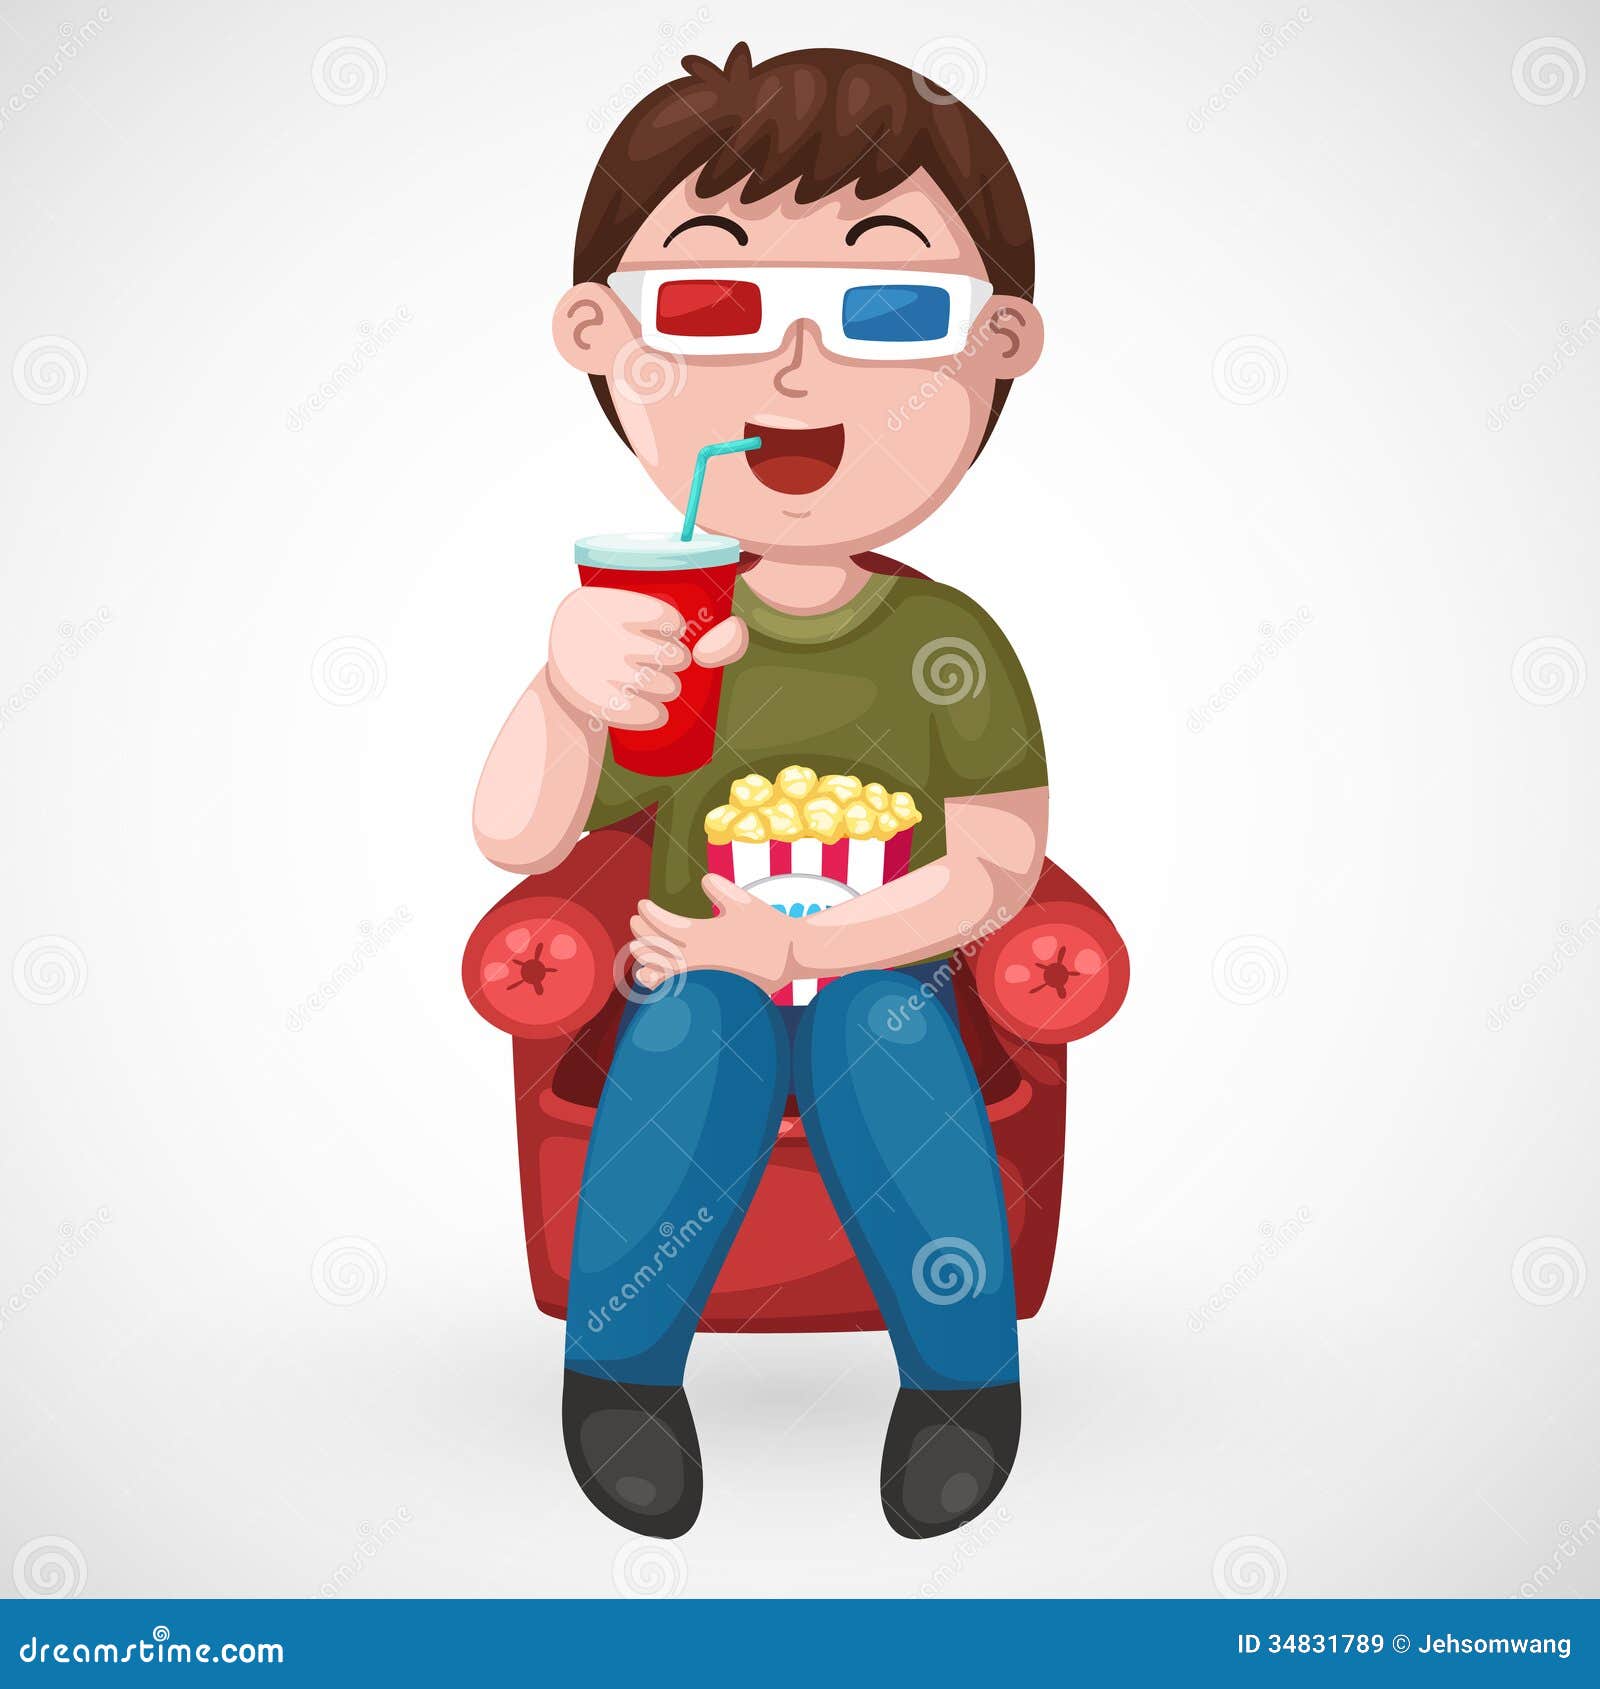 Kids Watching A Movie With 3d Glasses Stock Vector - Illustration of ...